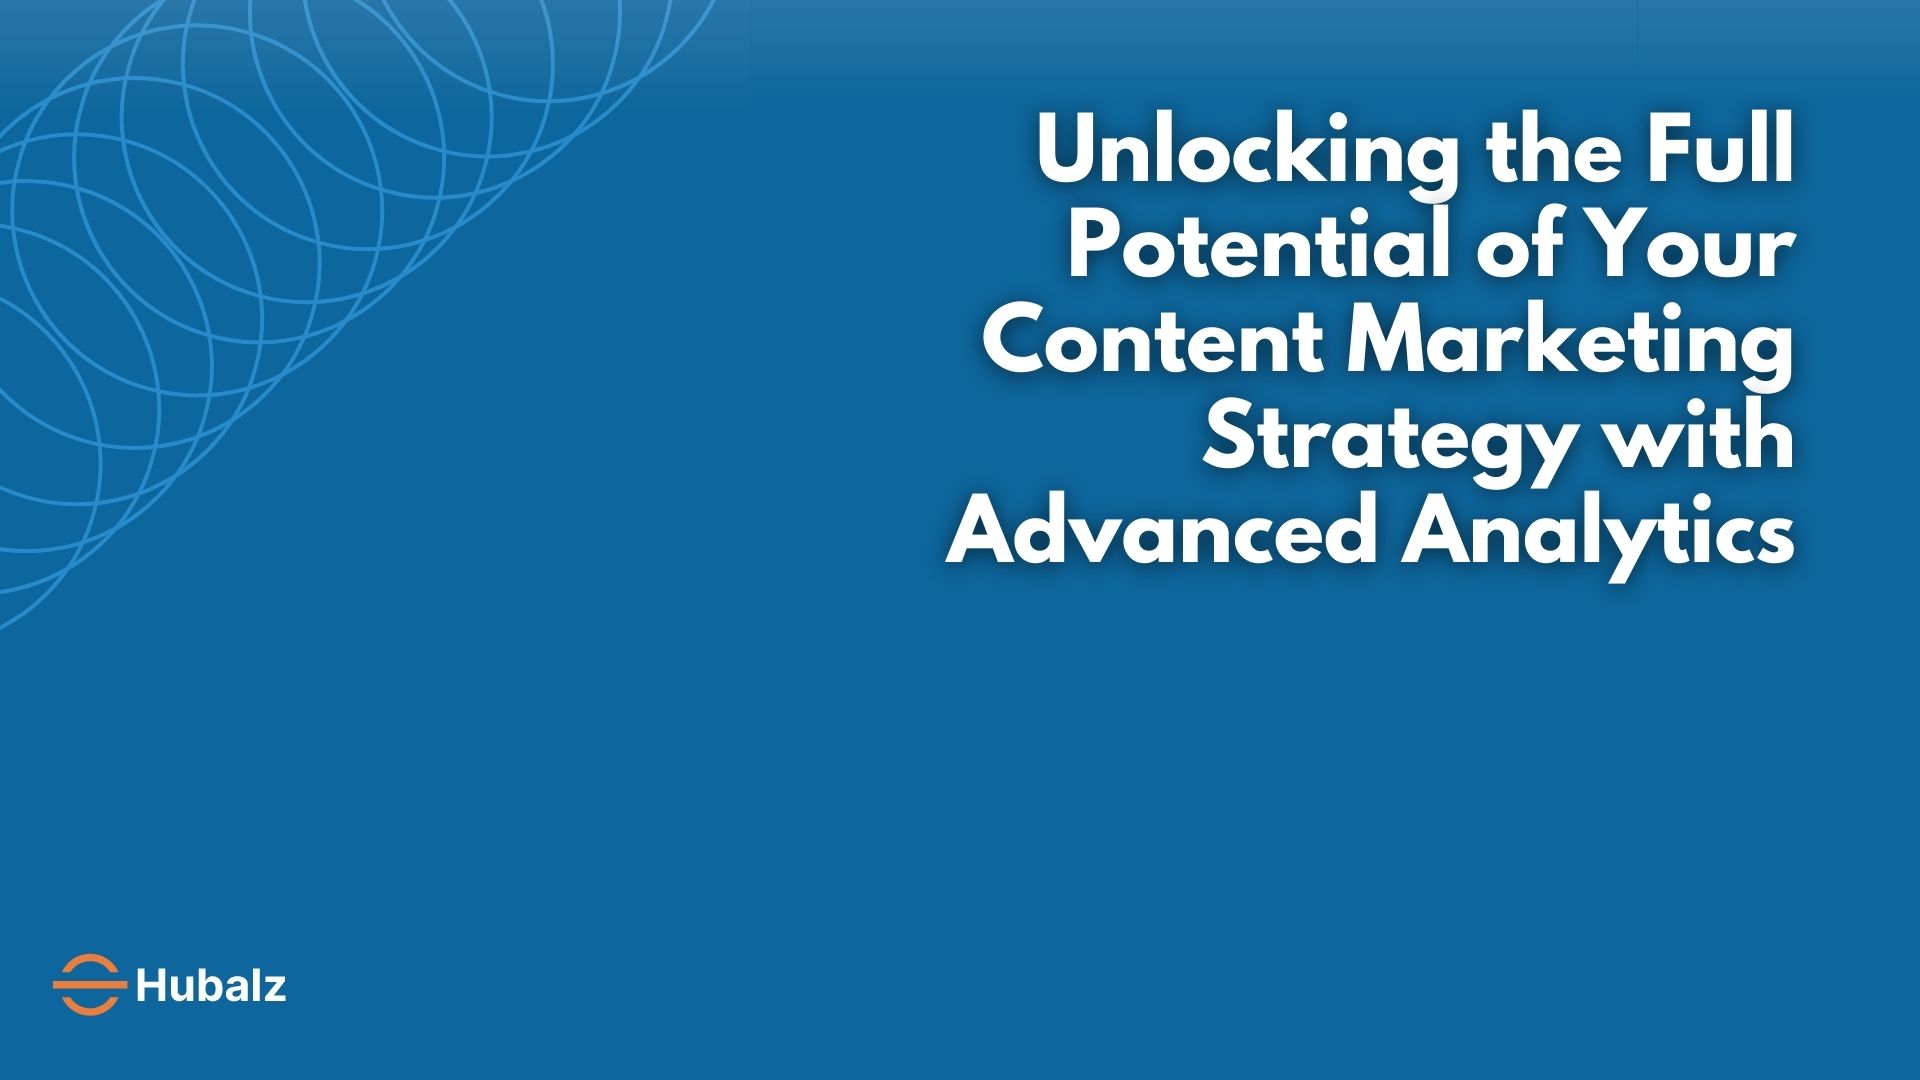 Unlocking the Full Potential of Your Content Marketing Strategy with Advanced Analytics